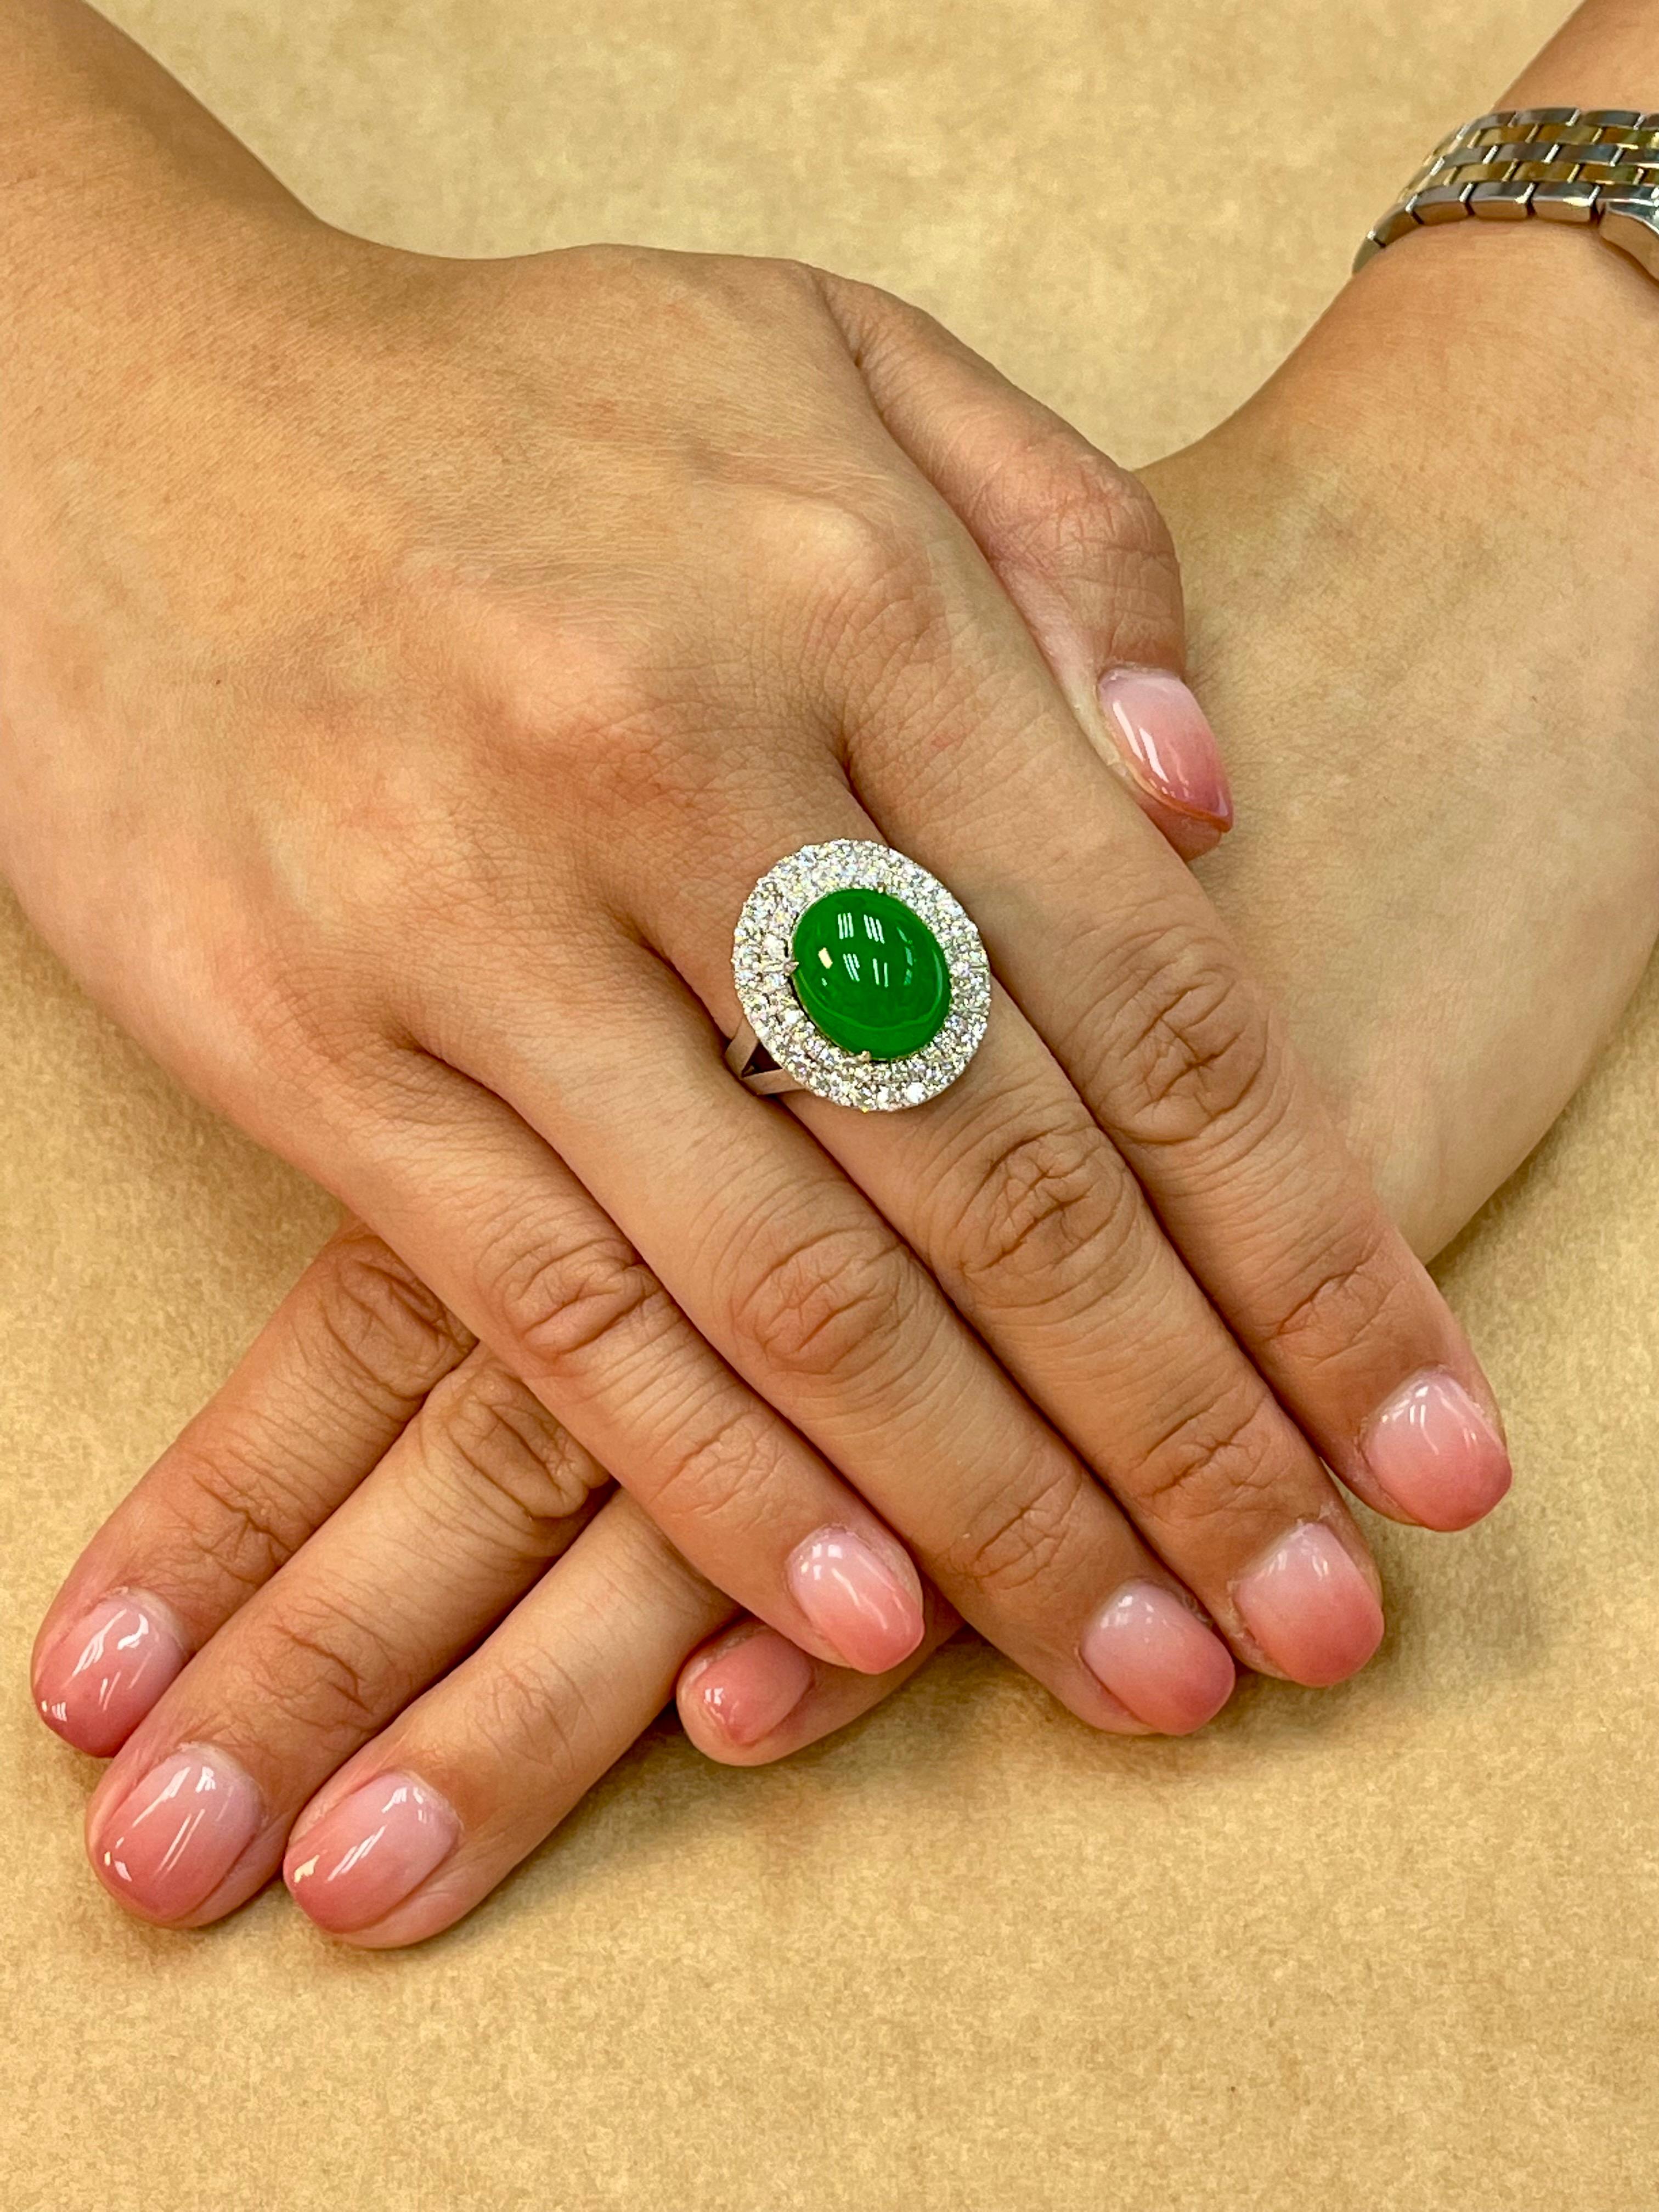 Please check out the HD video. THIS JADE IS SUBSTANTIAL! Here is a bright apple green XL oval high domed cabochon jade (13.3mm) and diamond ring. This jade is one step away from being a true imperial jade! It is certified as natural jadeite jade